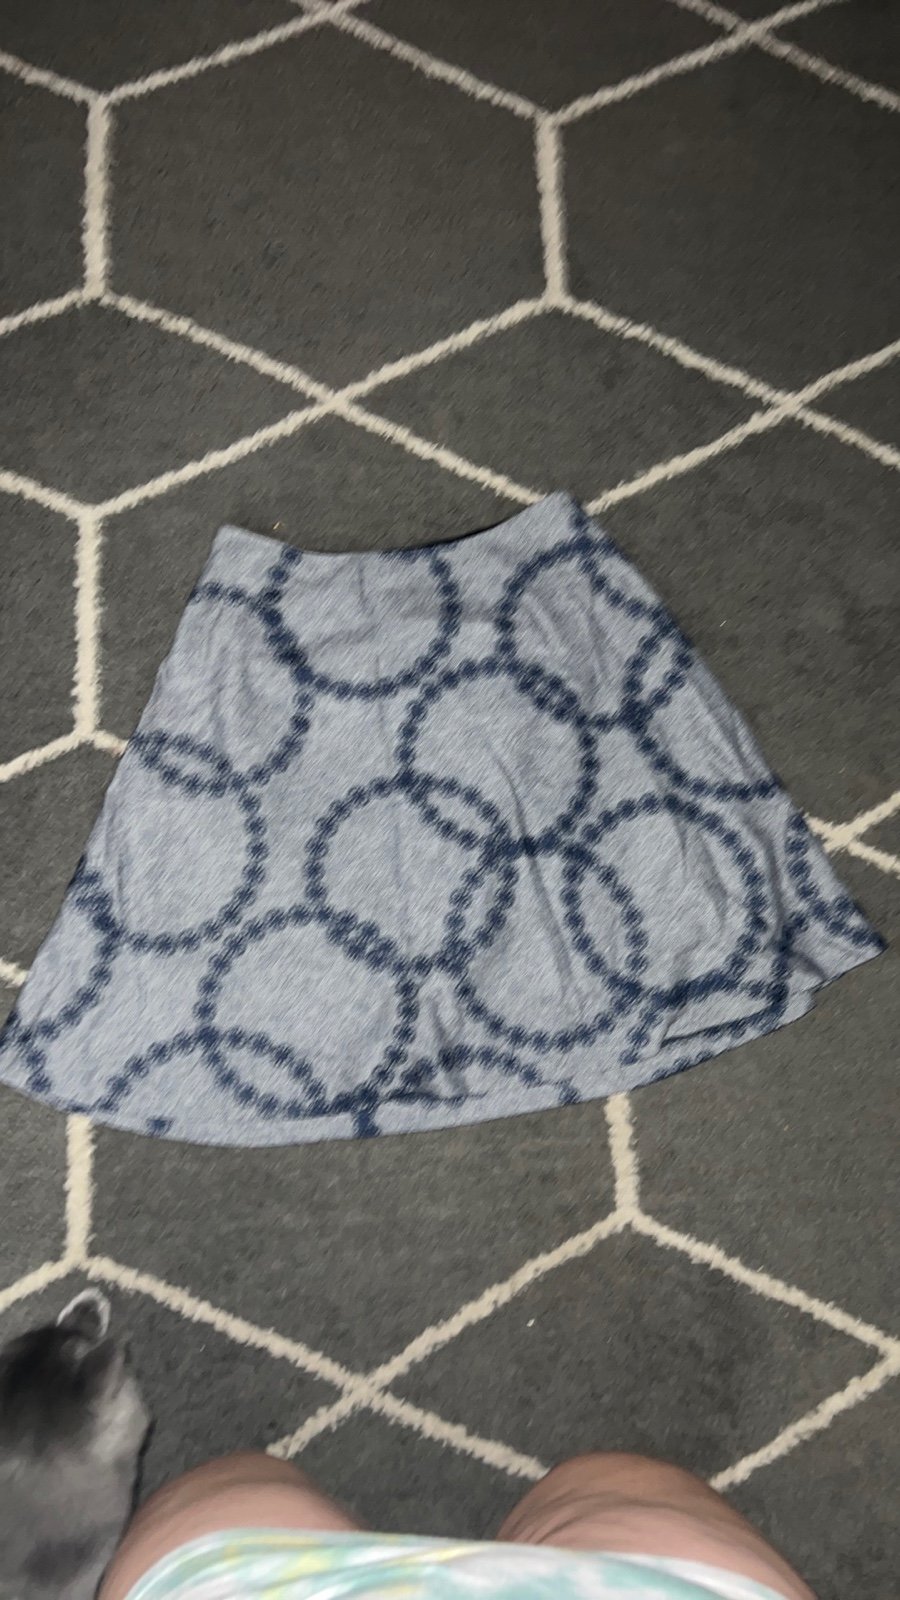 Affordable Boden Libby Circle Wool Blend Embroidered Grey & Blue Skirt Size 6R PBesDgz9w Outlet Store